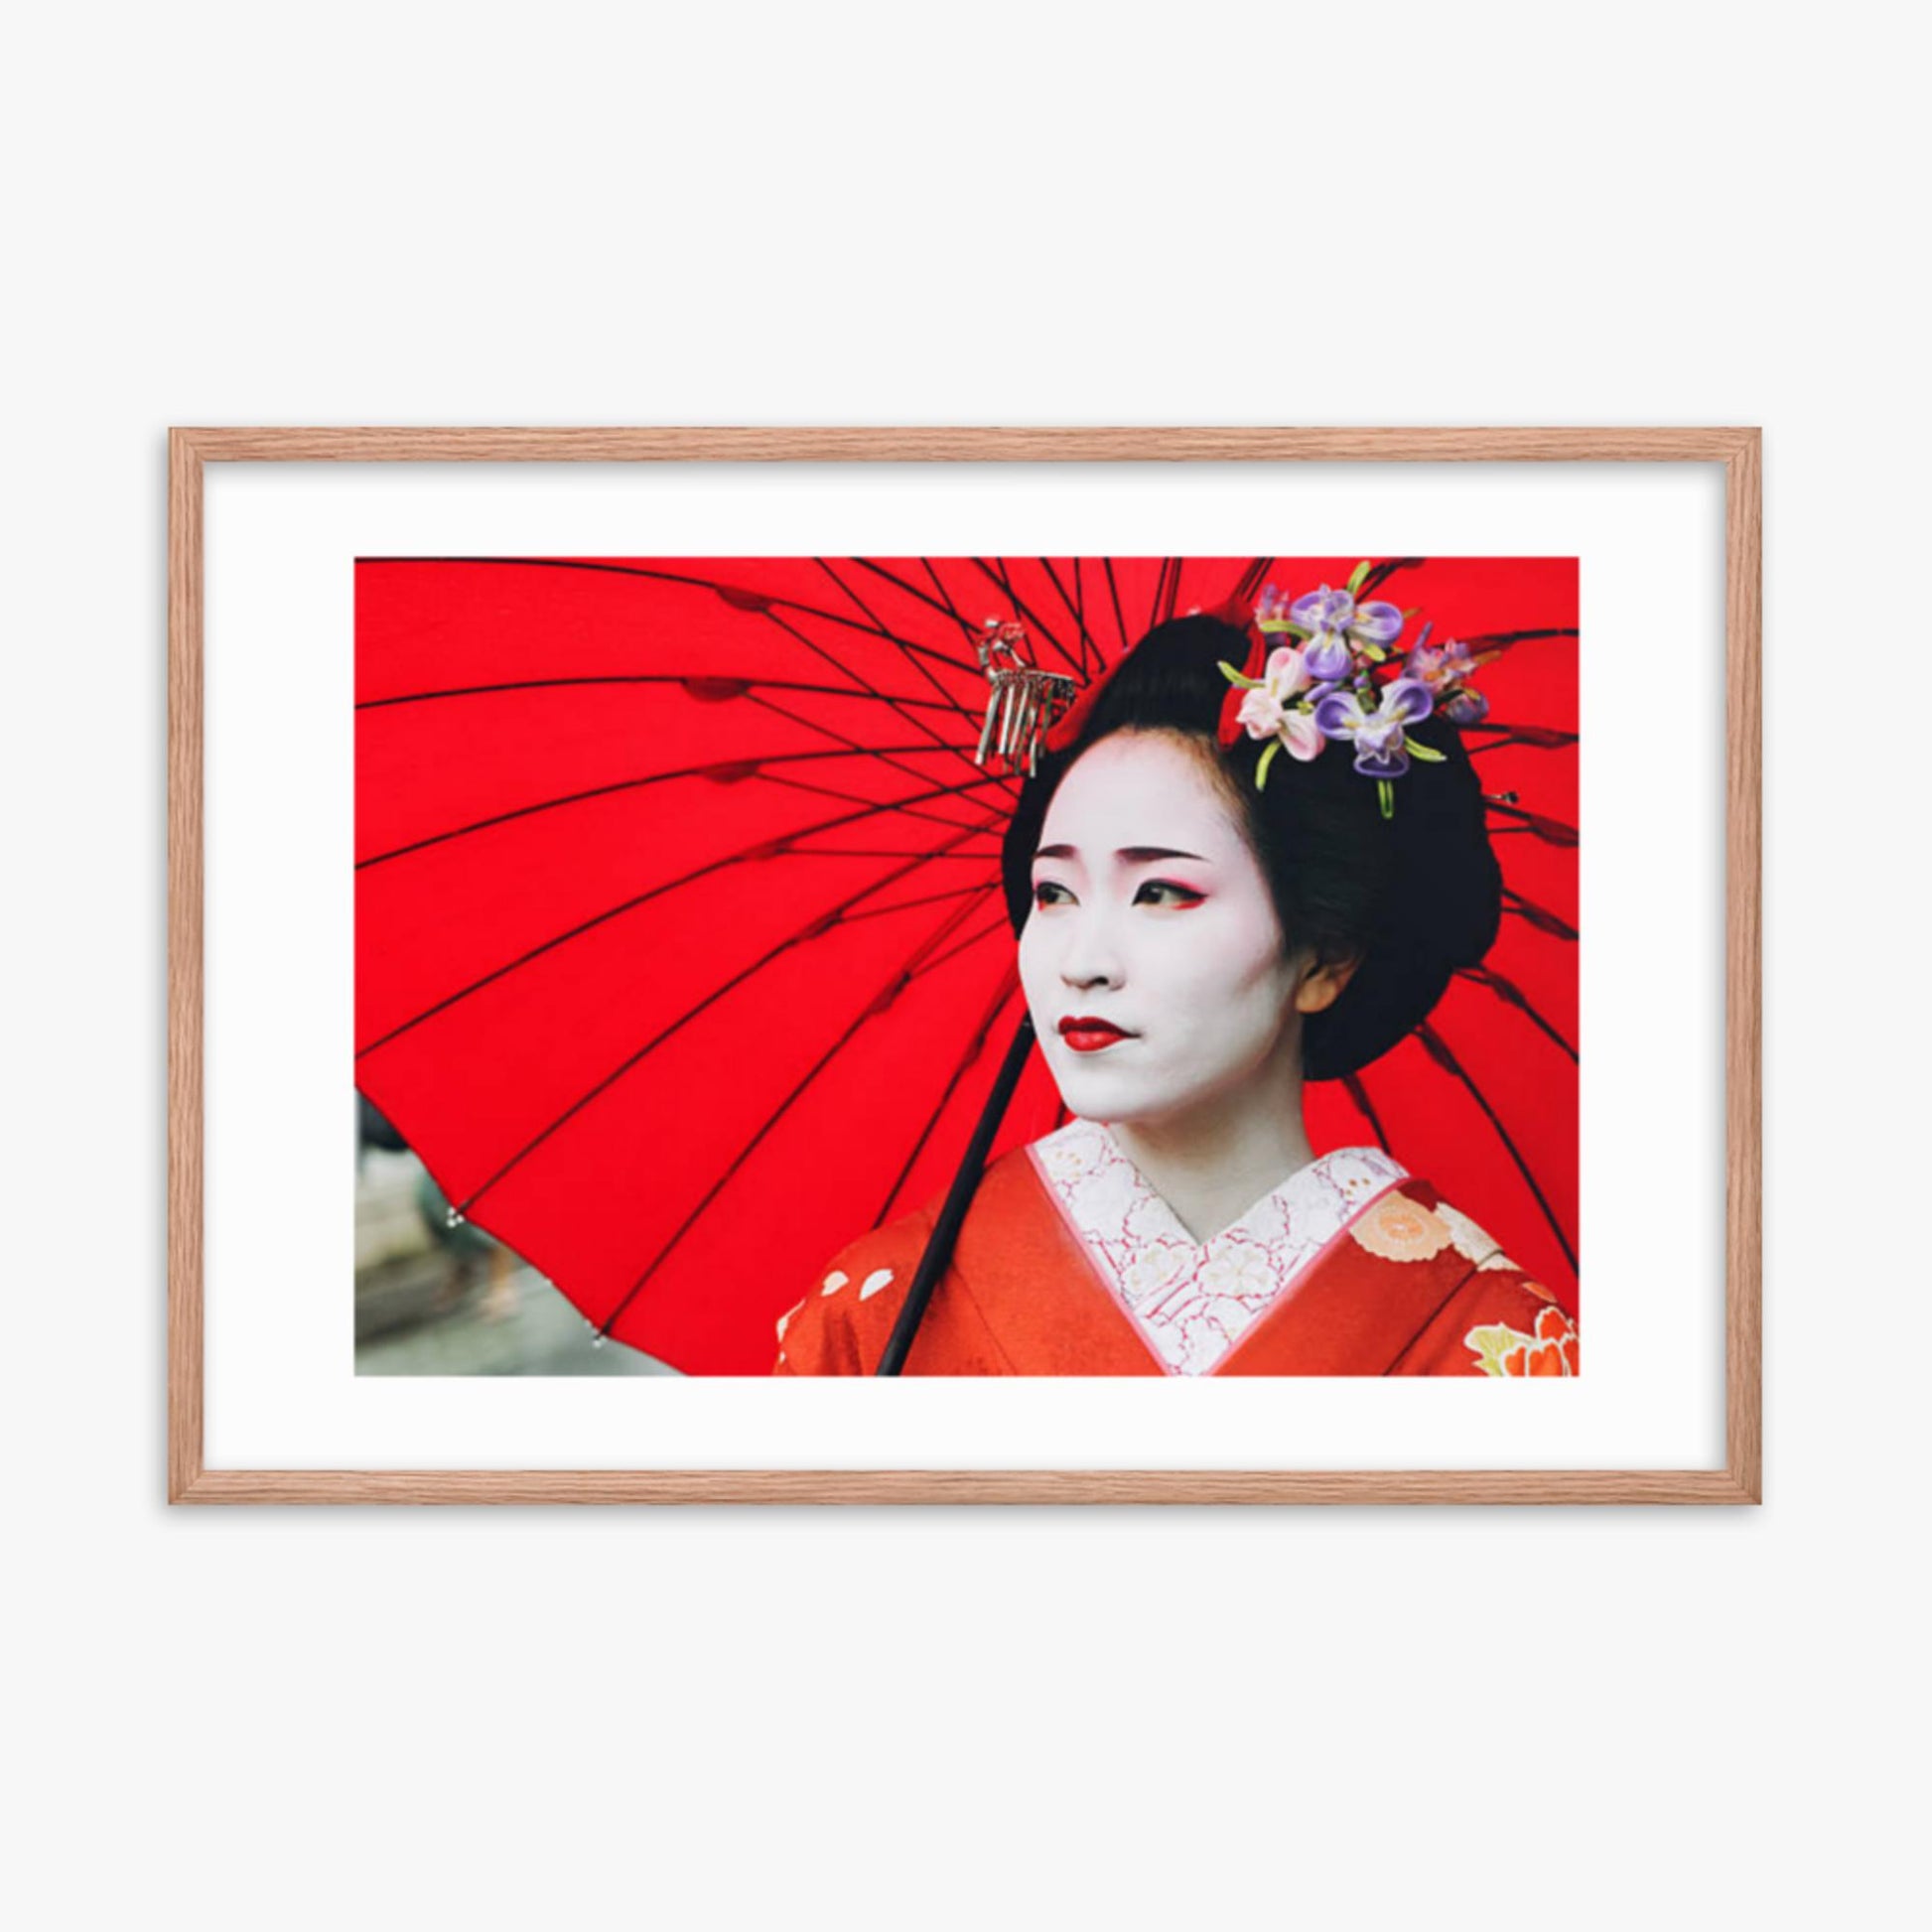 Maiko Girl Portrait 24x36 in Poster With Oak Frame